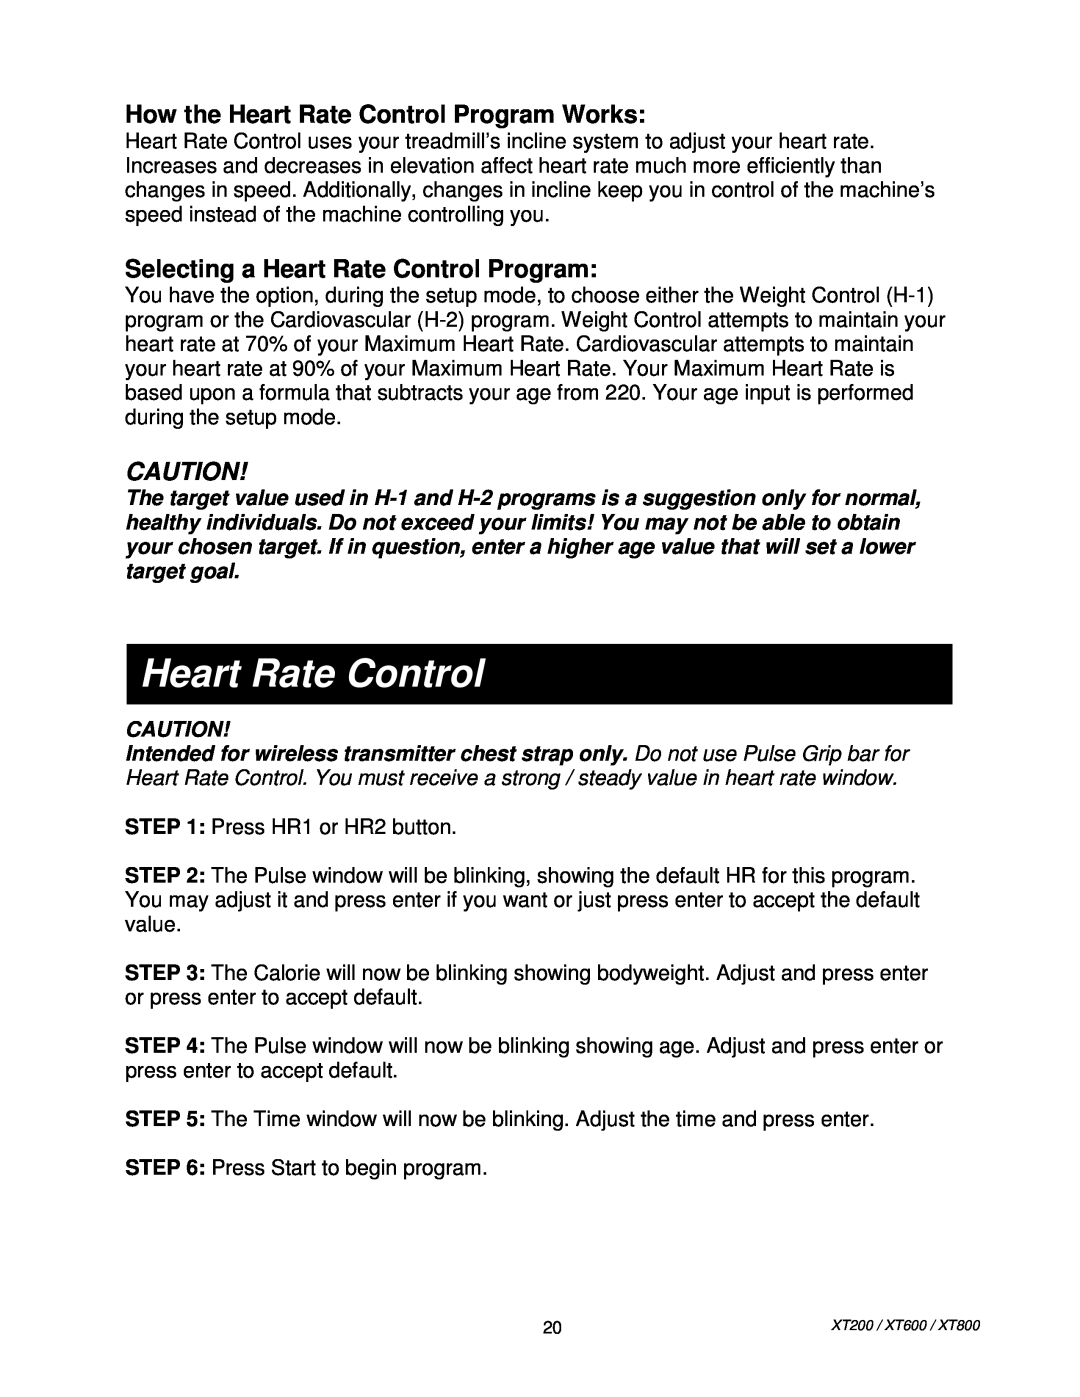 Spirit XT80013 manual How the Heart Rate Control Program Works, Selecting a Heart Rate Control Program 